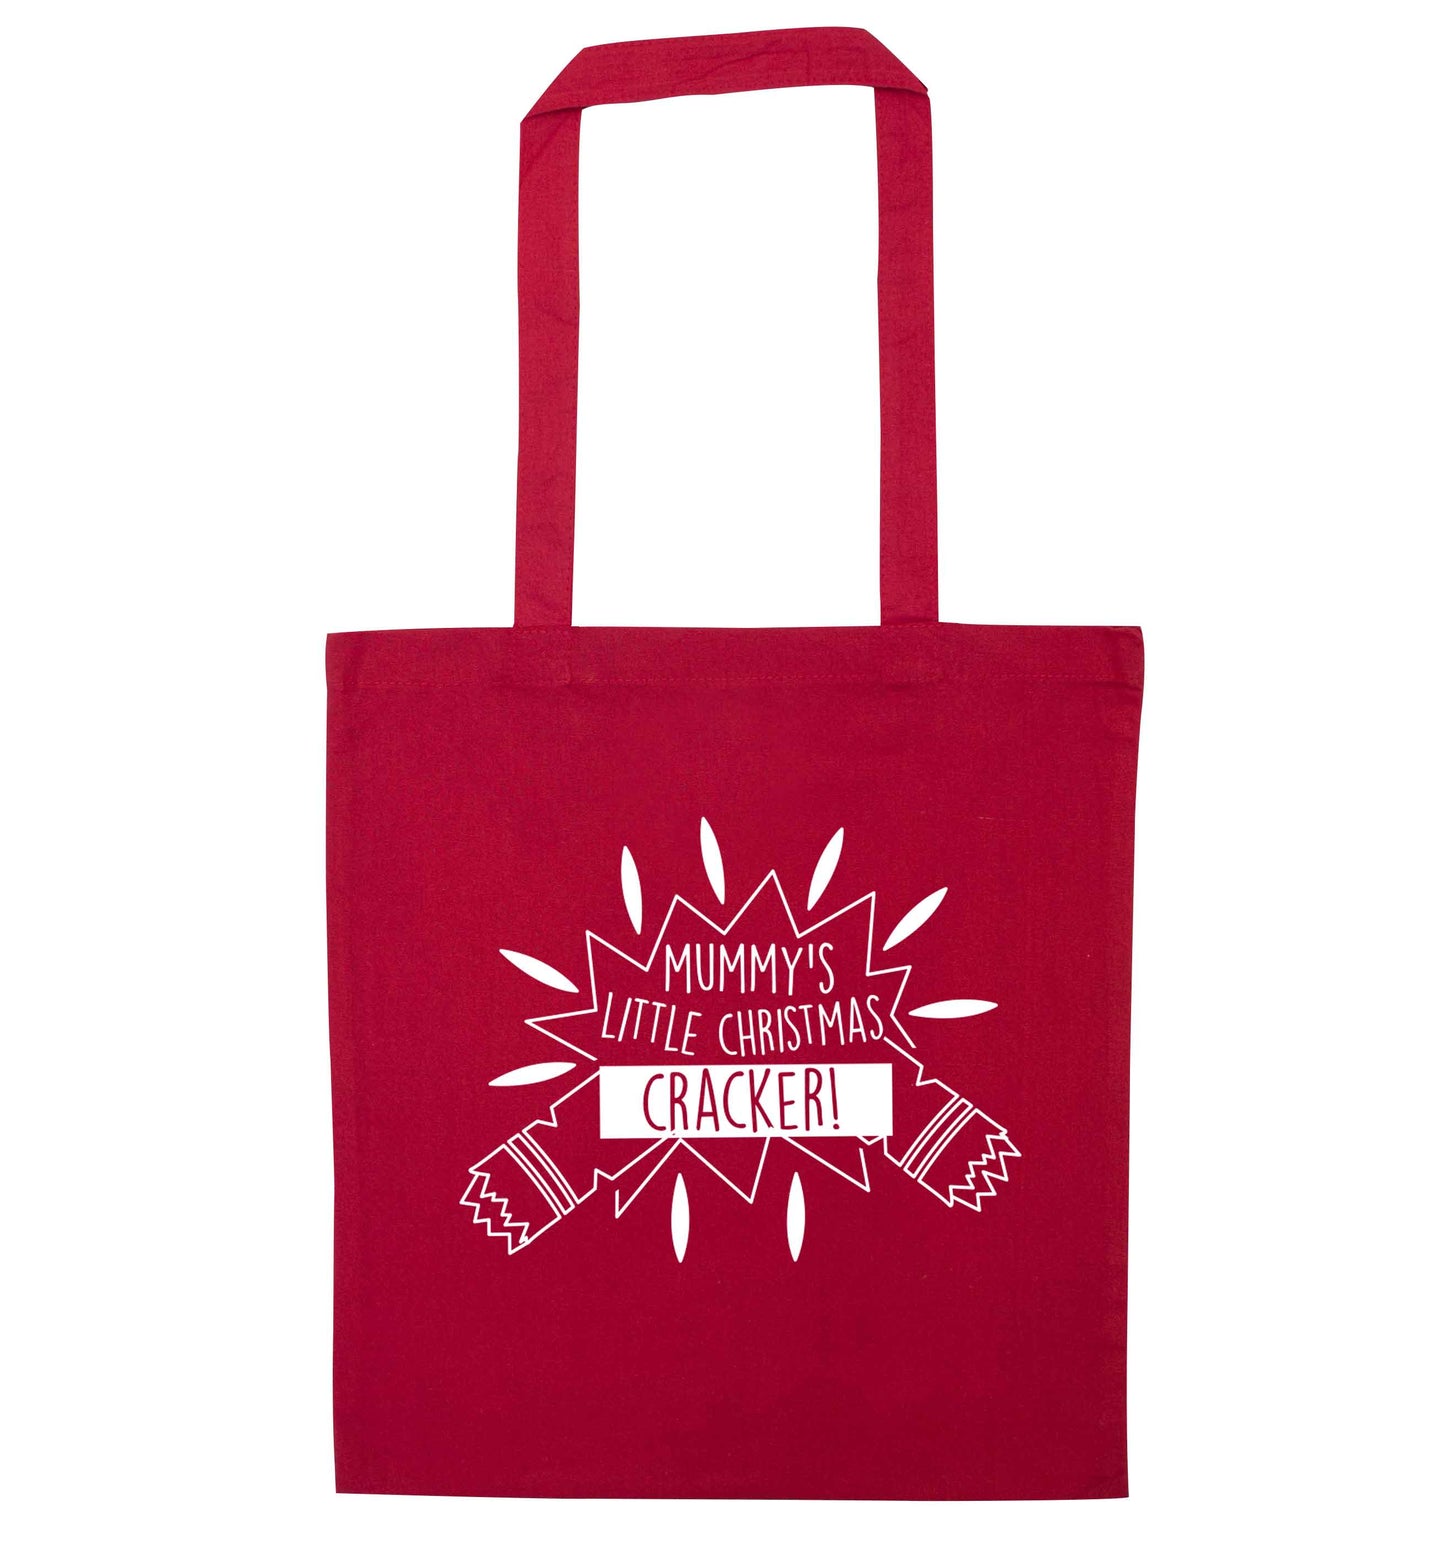 Mummy's little christmas cracker red tote bag